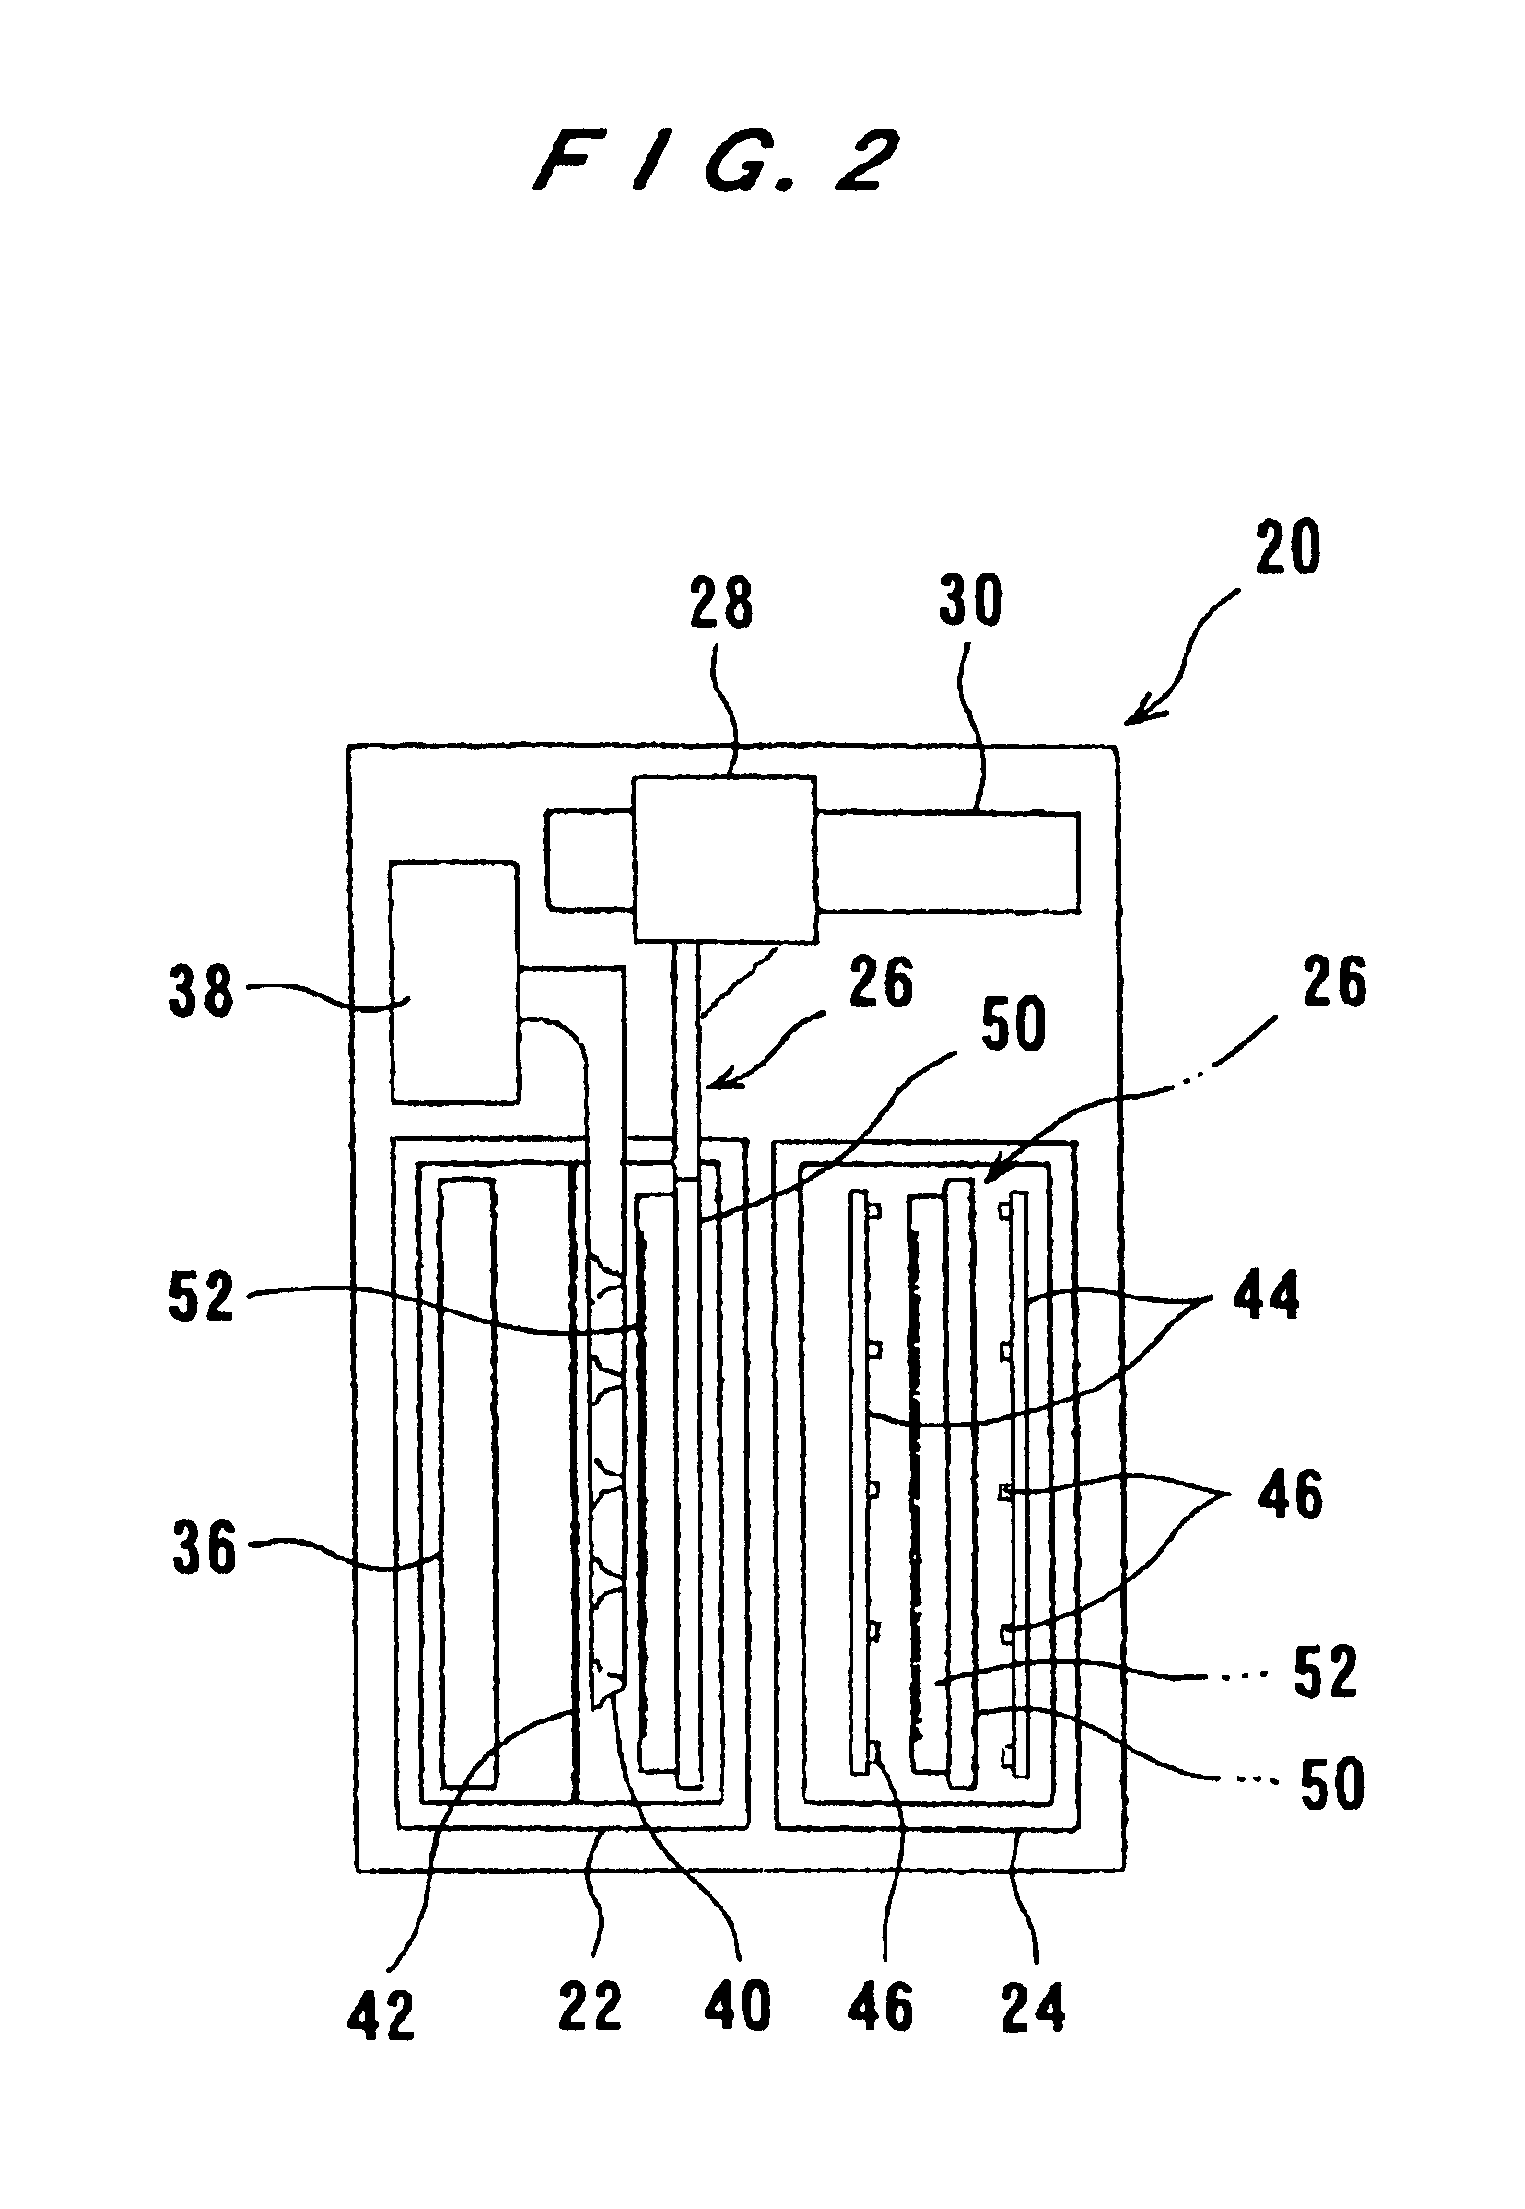 Substrate holder, plating apparatus, and plating method